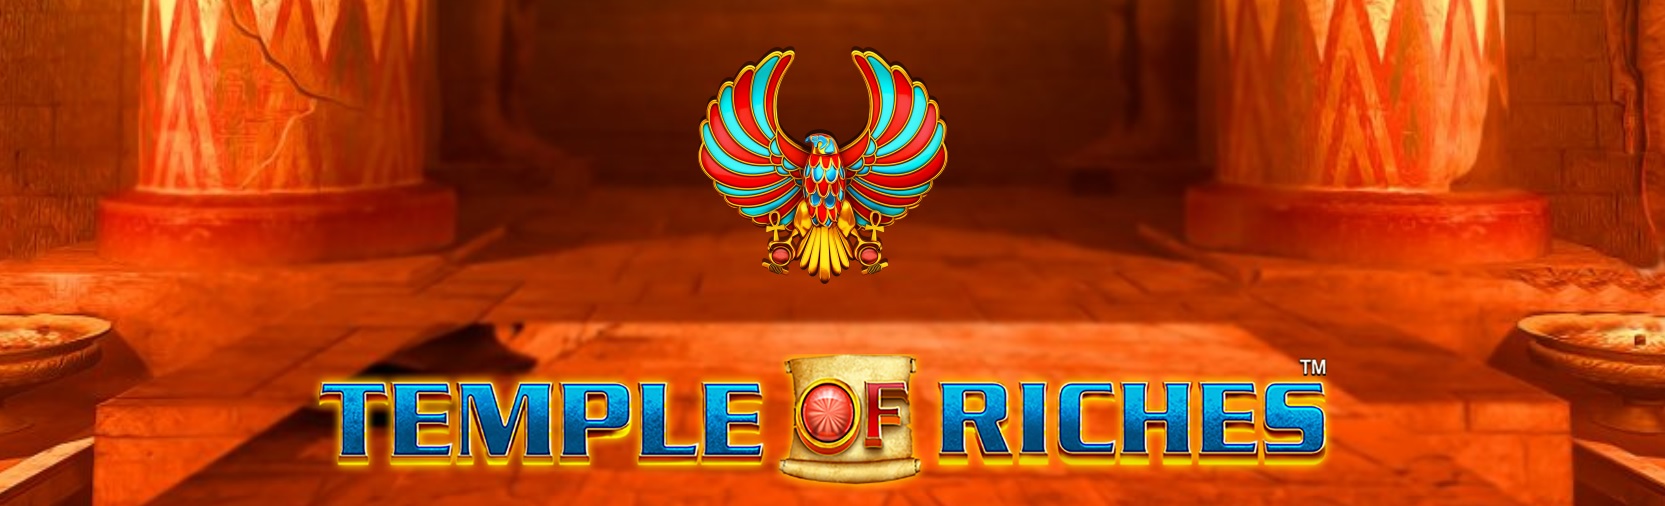 Temple of Riches Slot logo